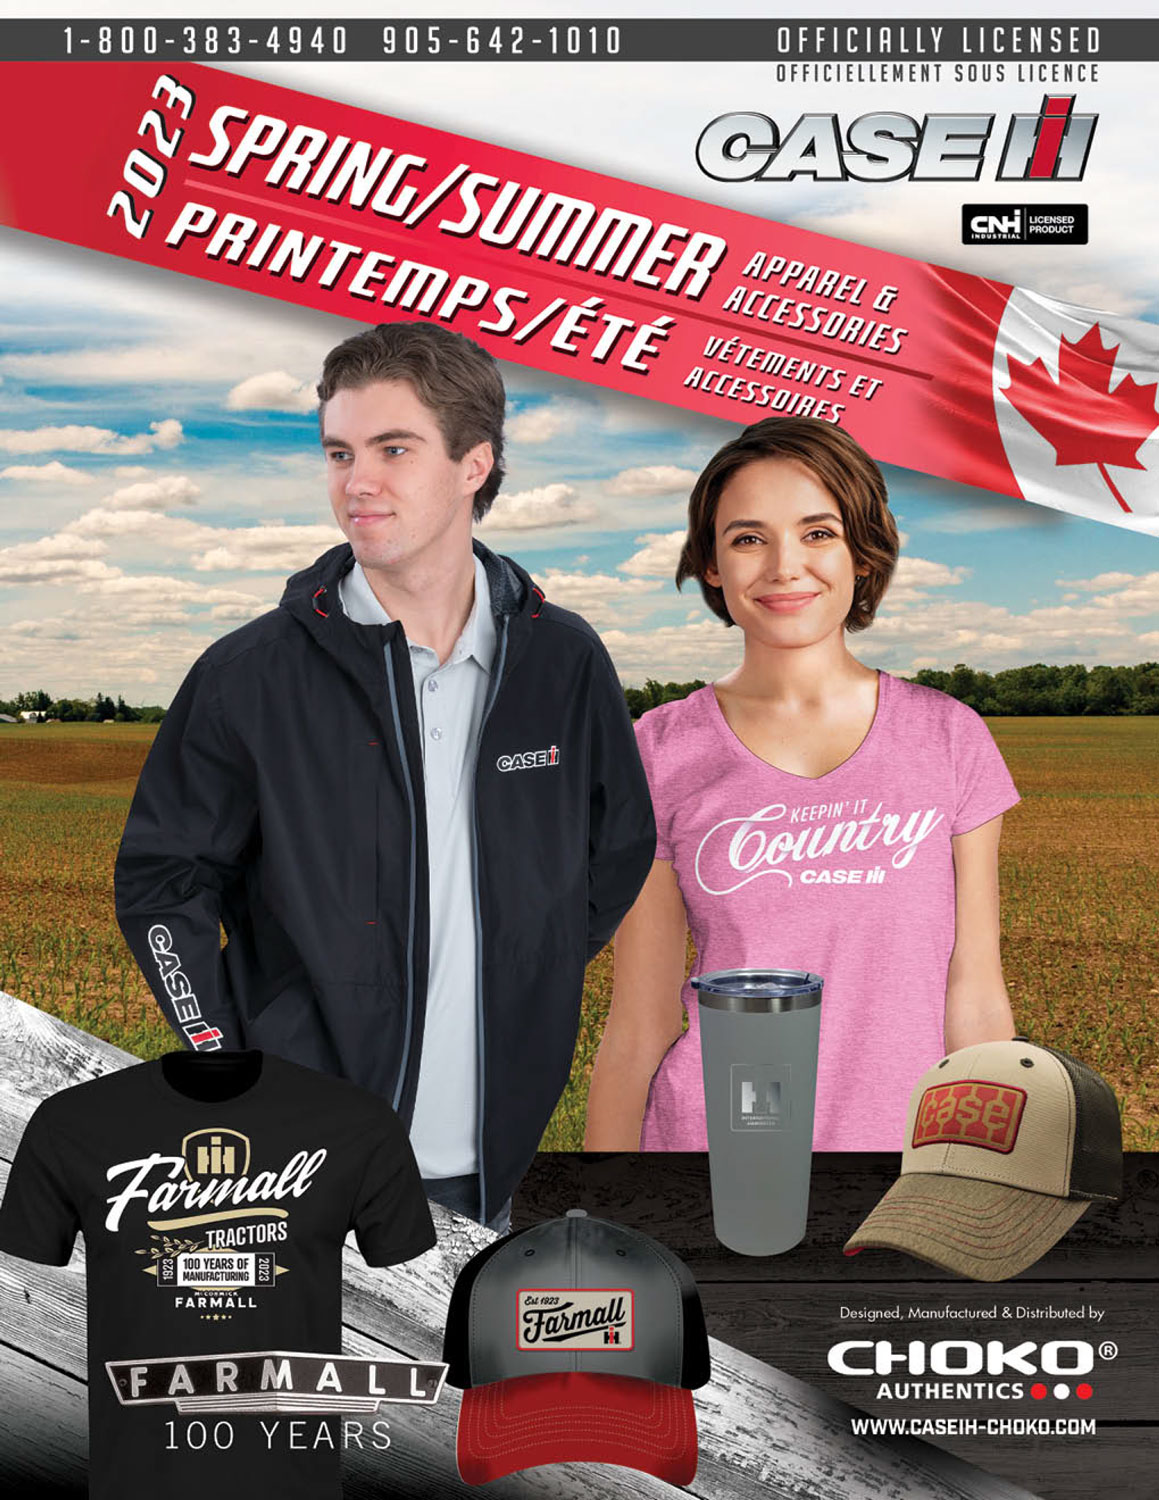 Choko Case IH Clothing and Accessories